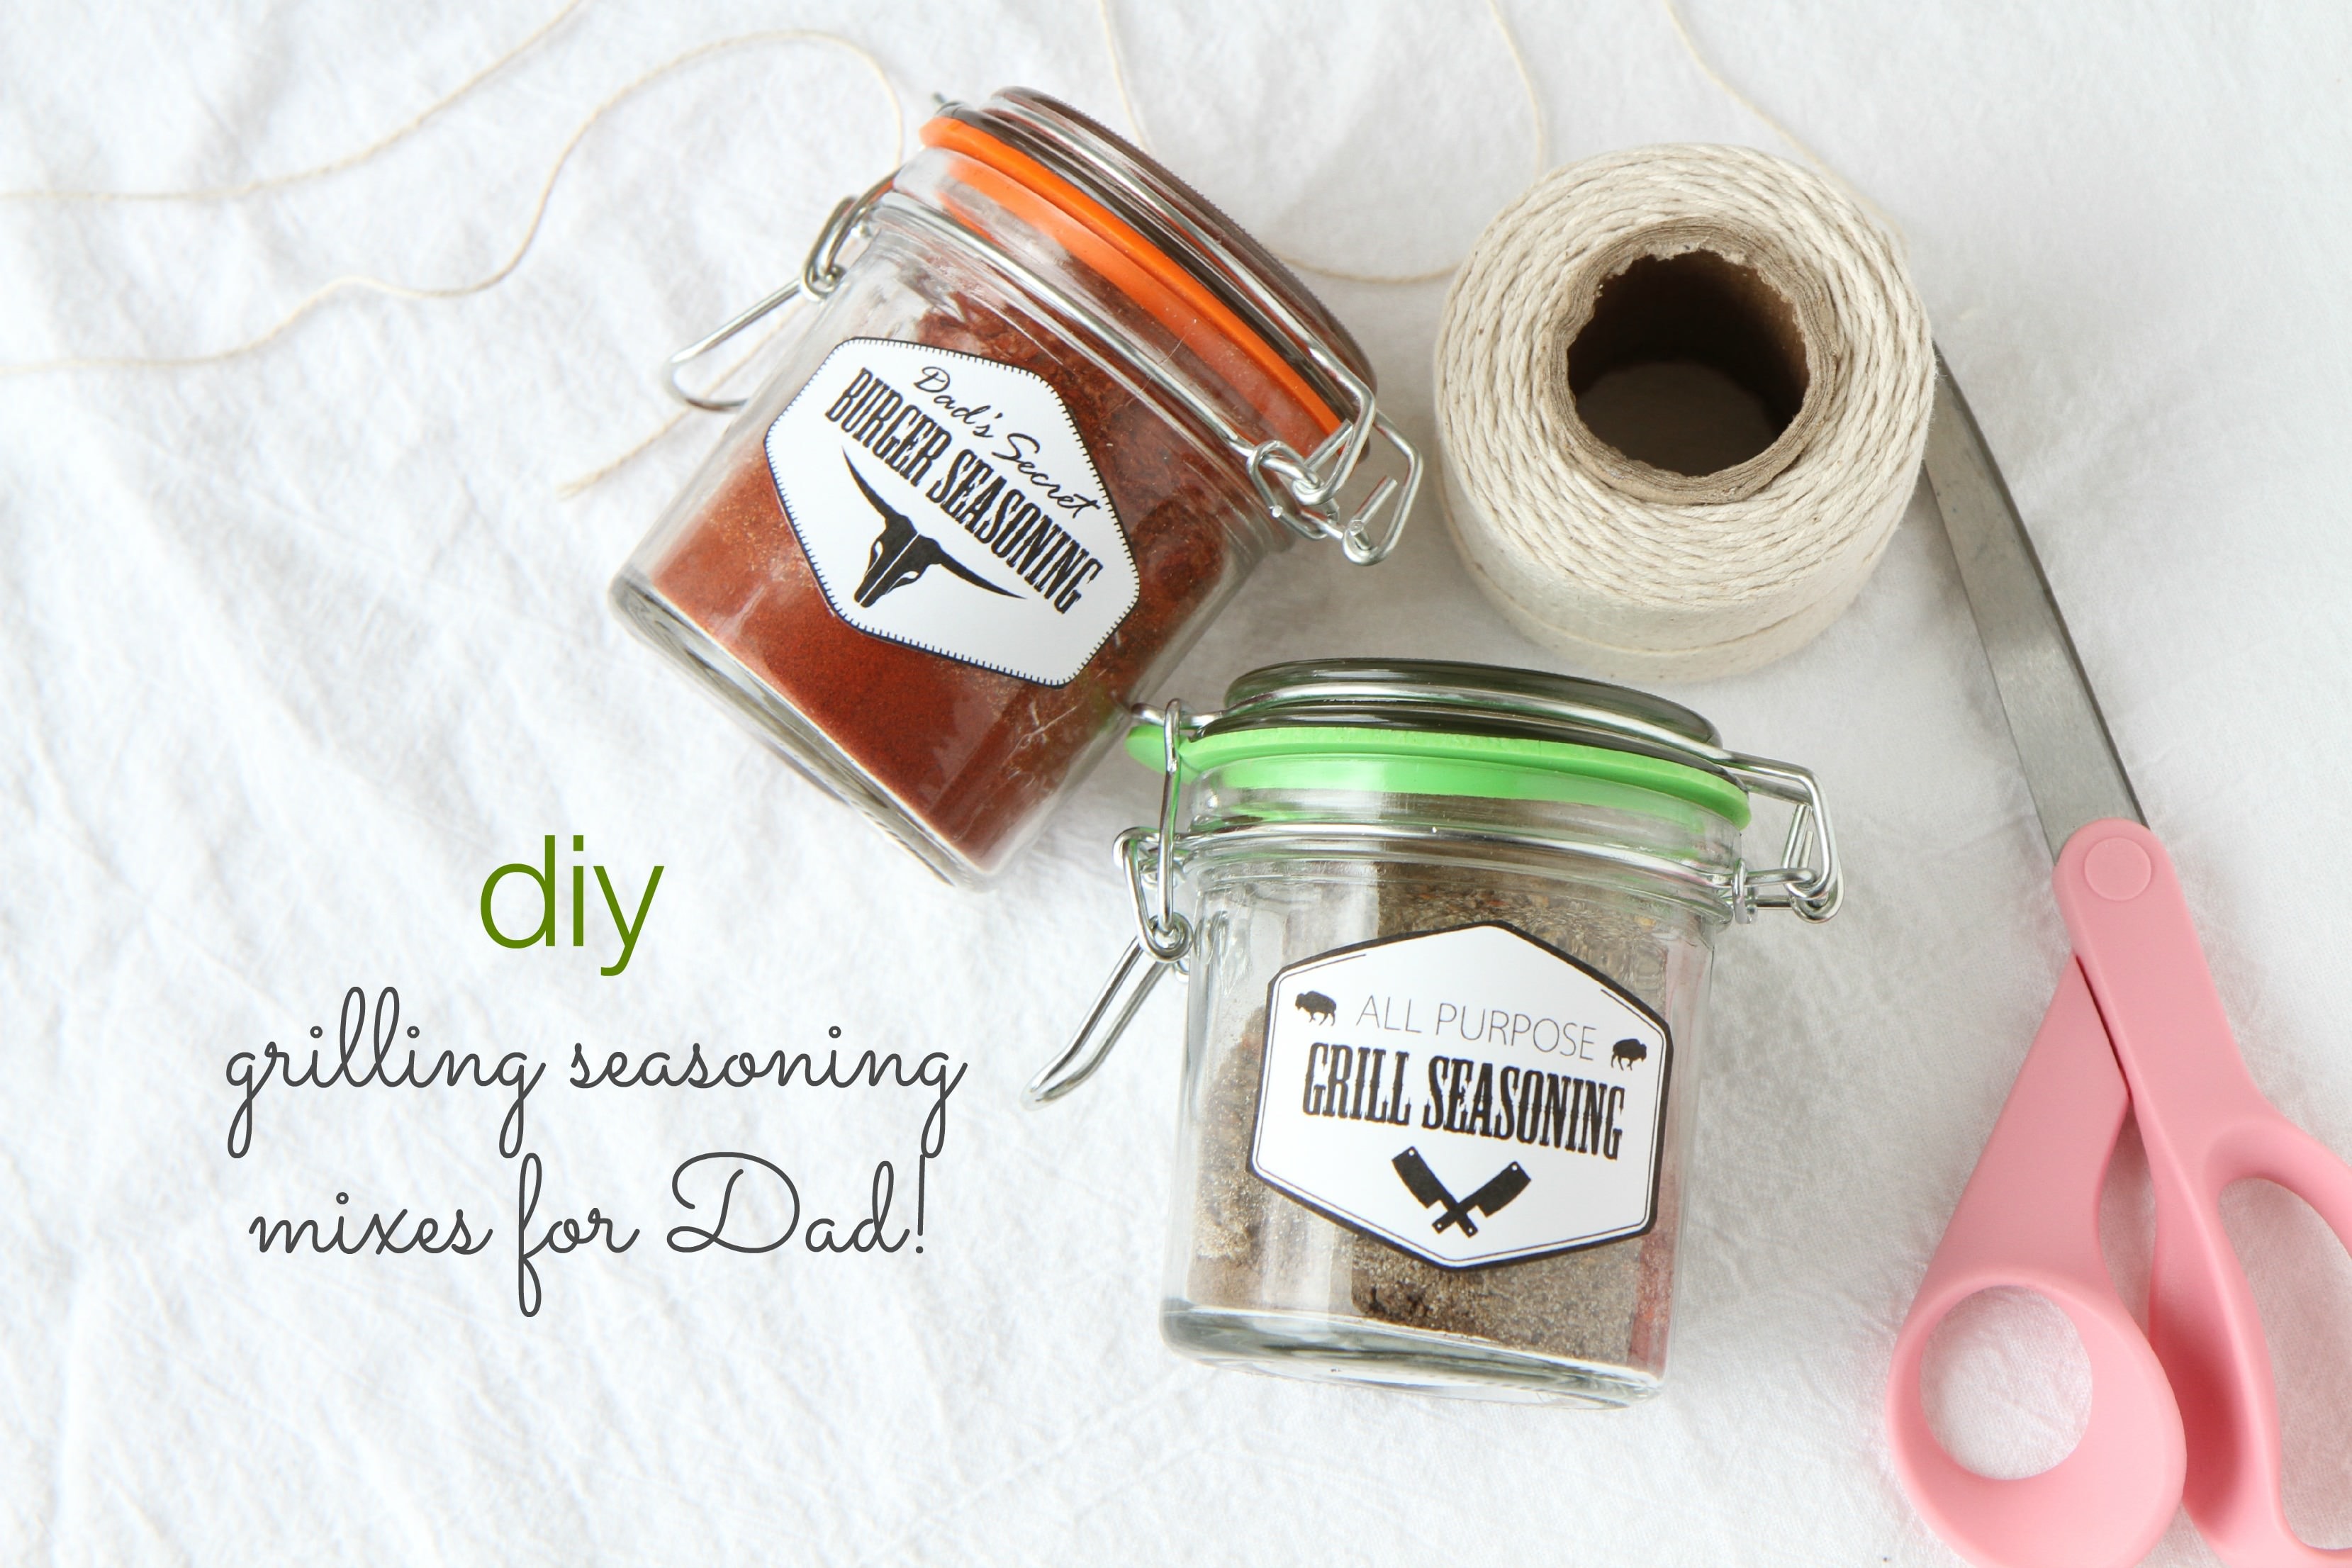 DIY Grilling Seasoning Mixes For Father’s Day